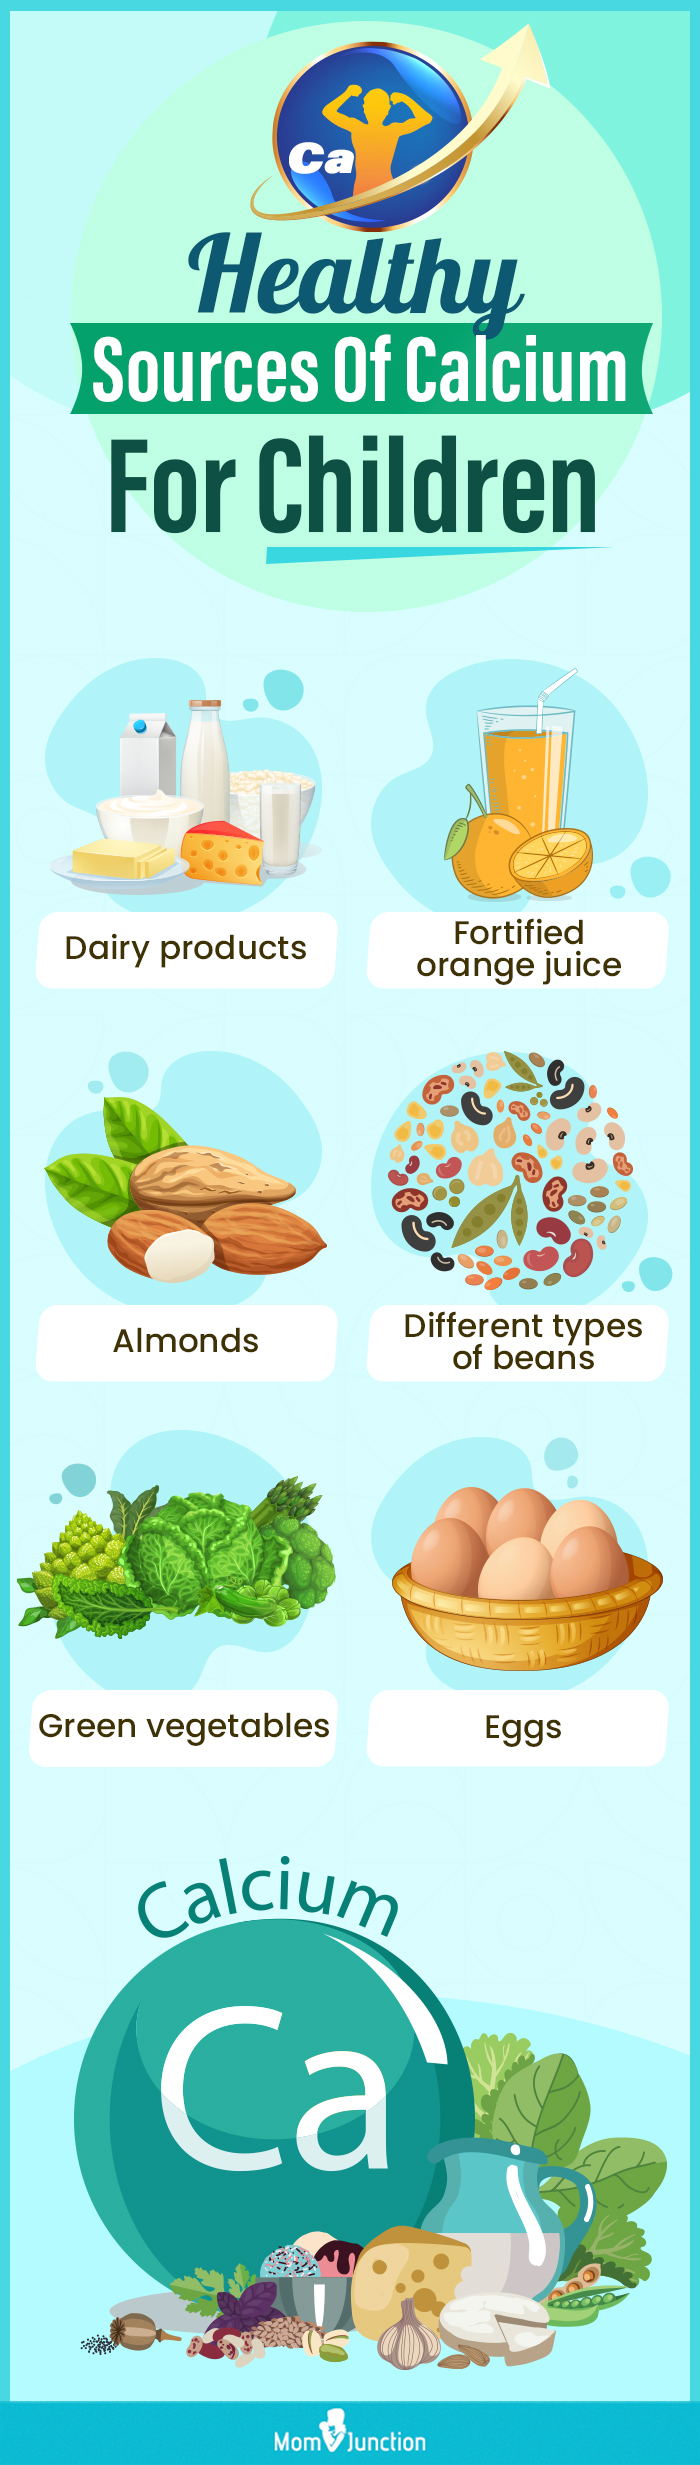 healthy sources of calcium for children (infographic)